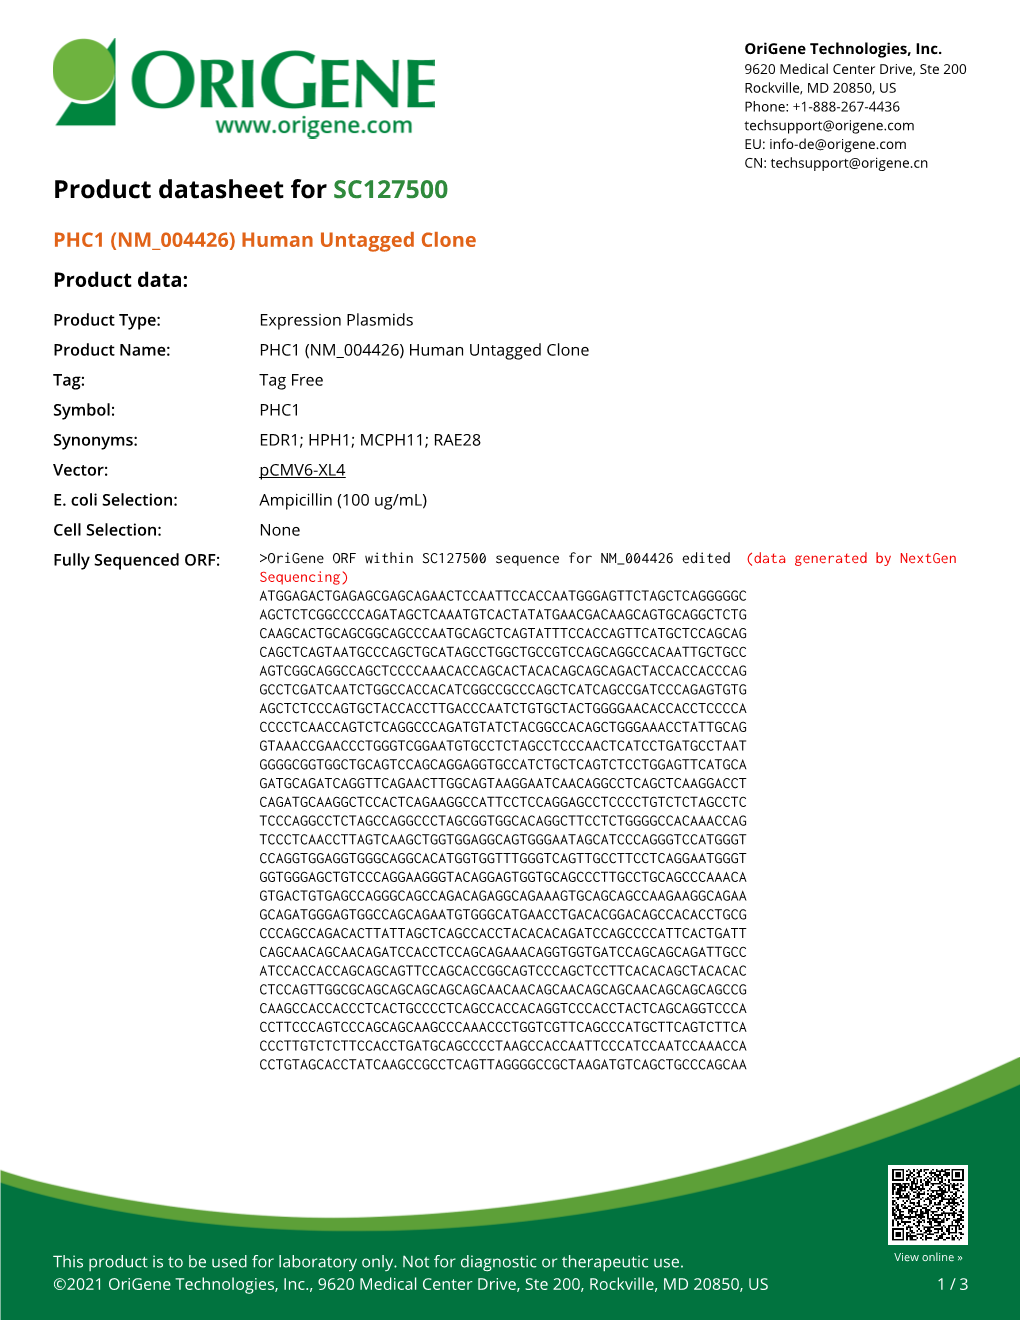 PHC1 (NM 004426) Human Untagged Clone Product Data